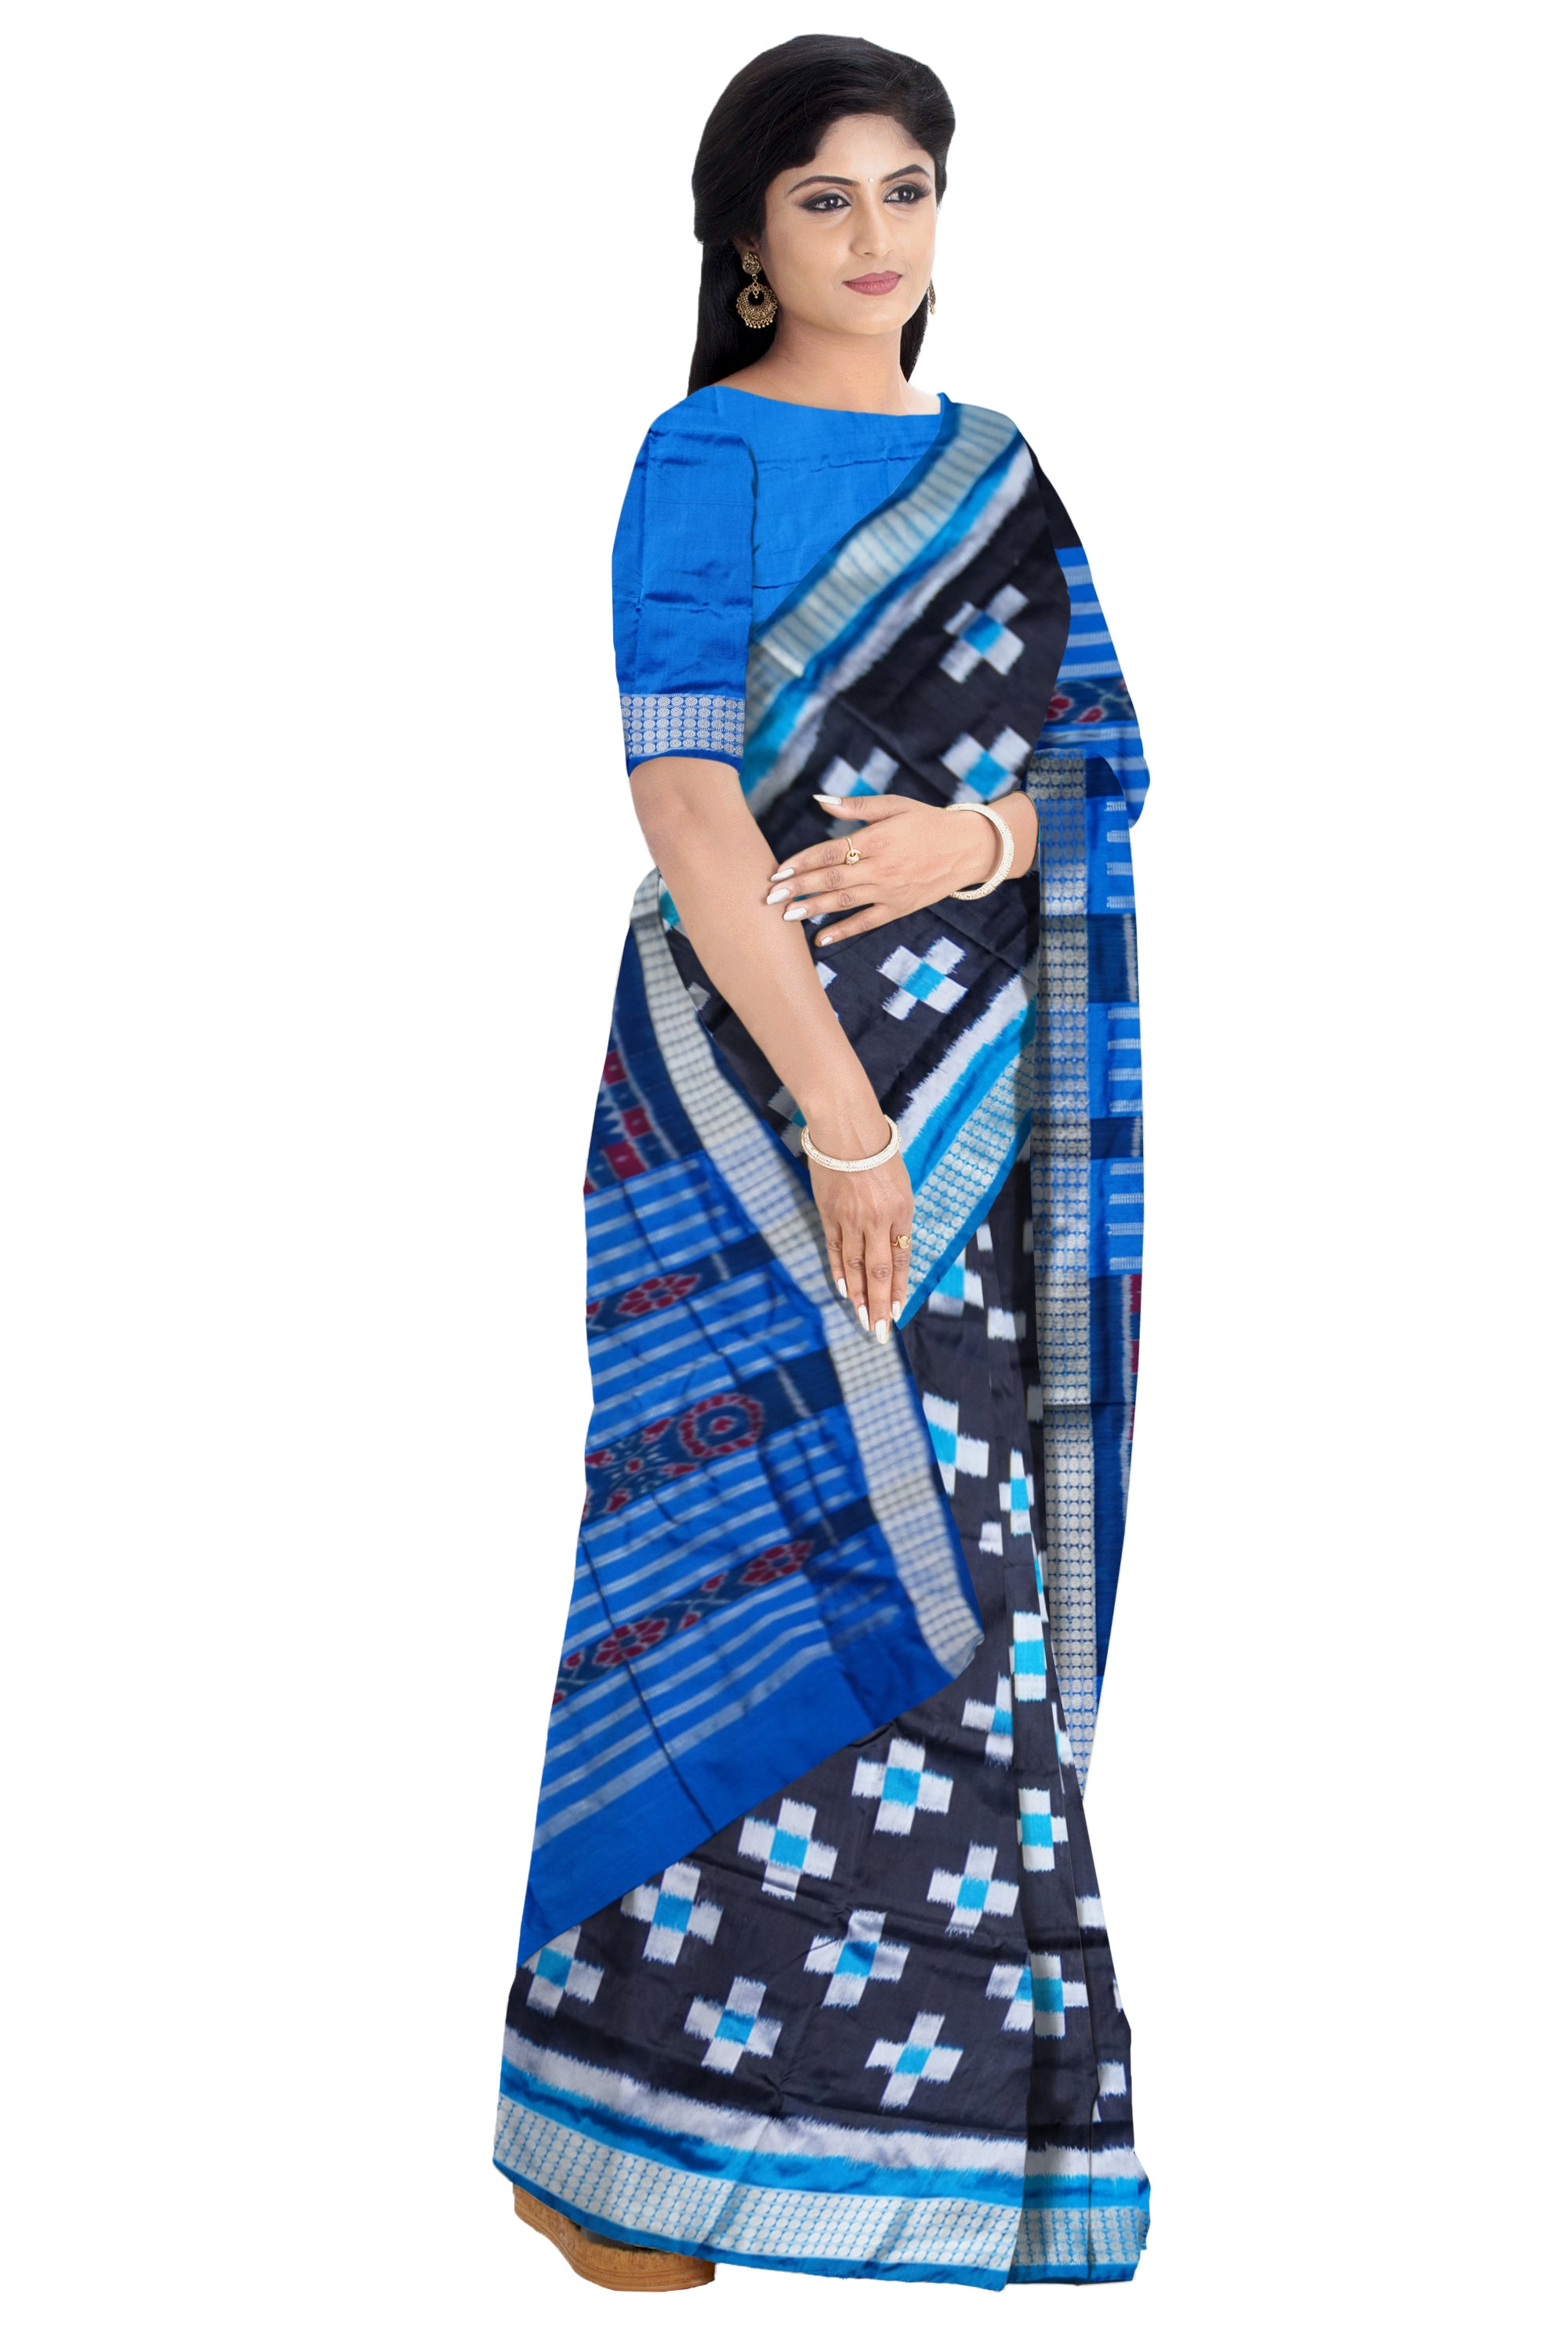 FULL BODY HAVE BLACK AND PALLU IS SKY COLOR BASE PASAPALI PATTERN PATA SAREE.COMES WITH MATCHING BLOUSE PIECE. - Koshali Arts & Crafts Enterprise